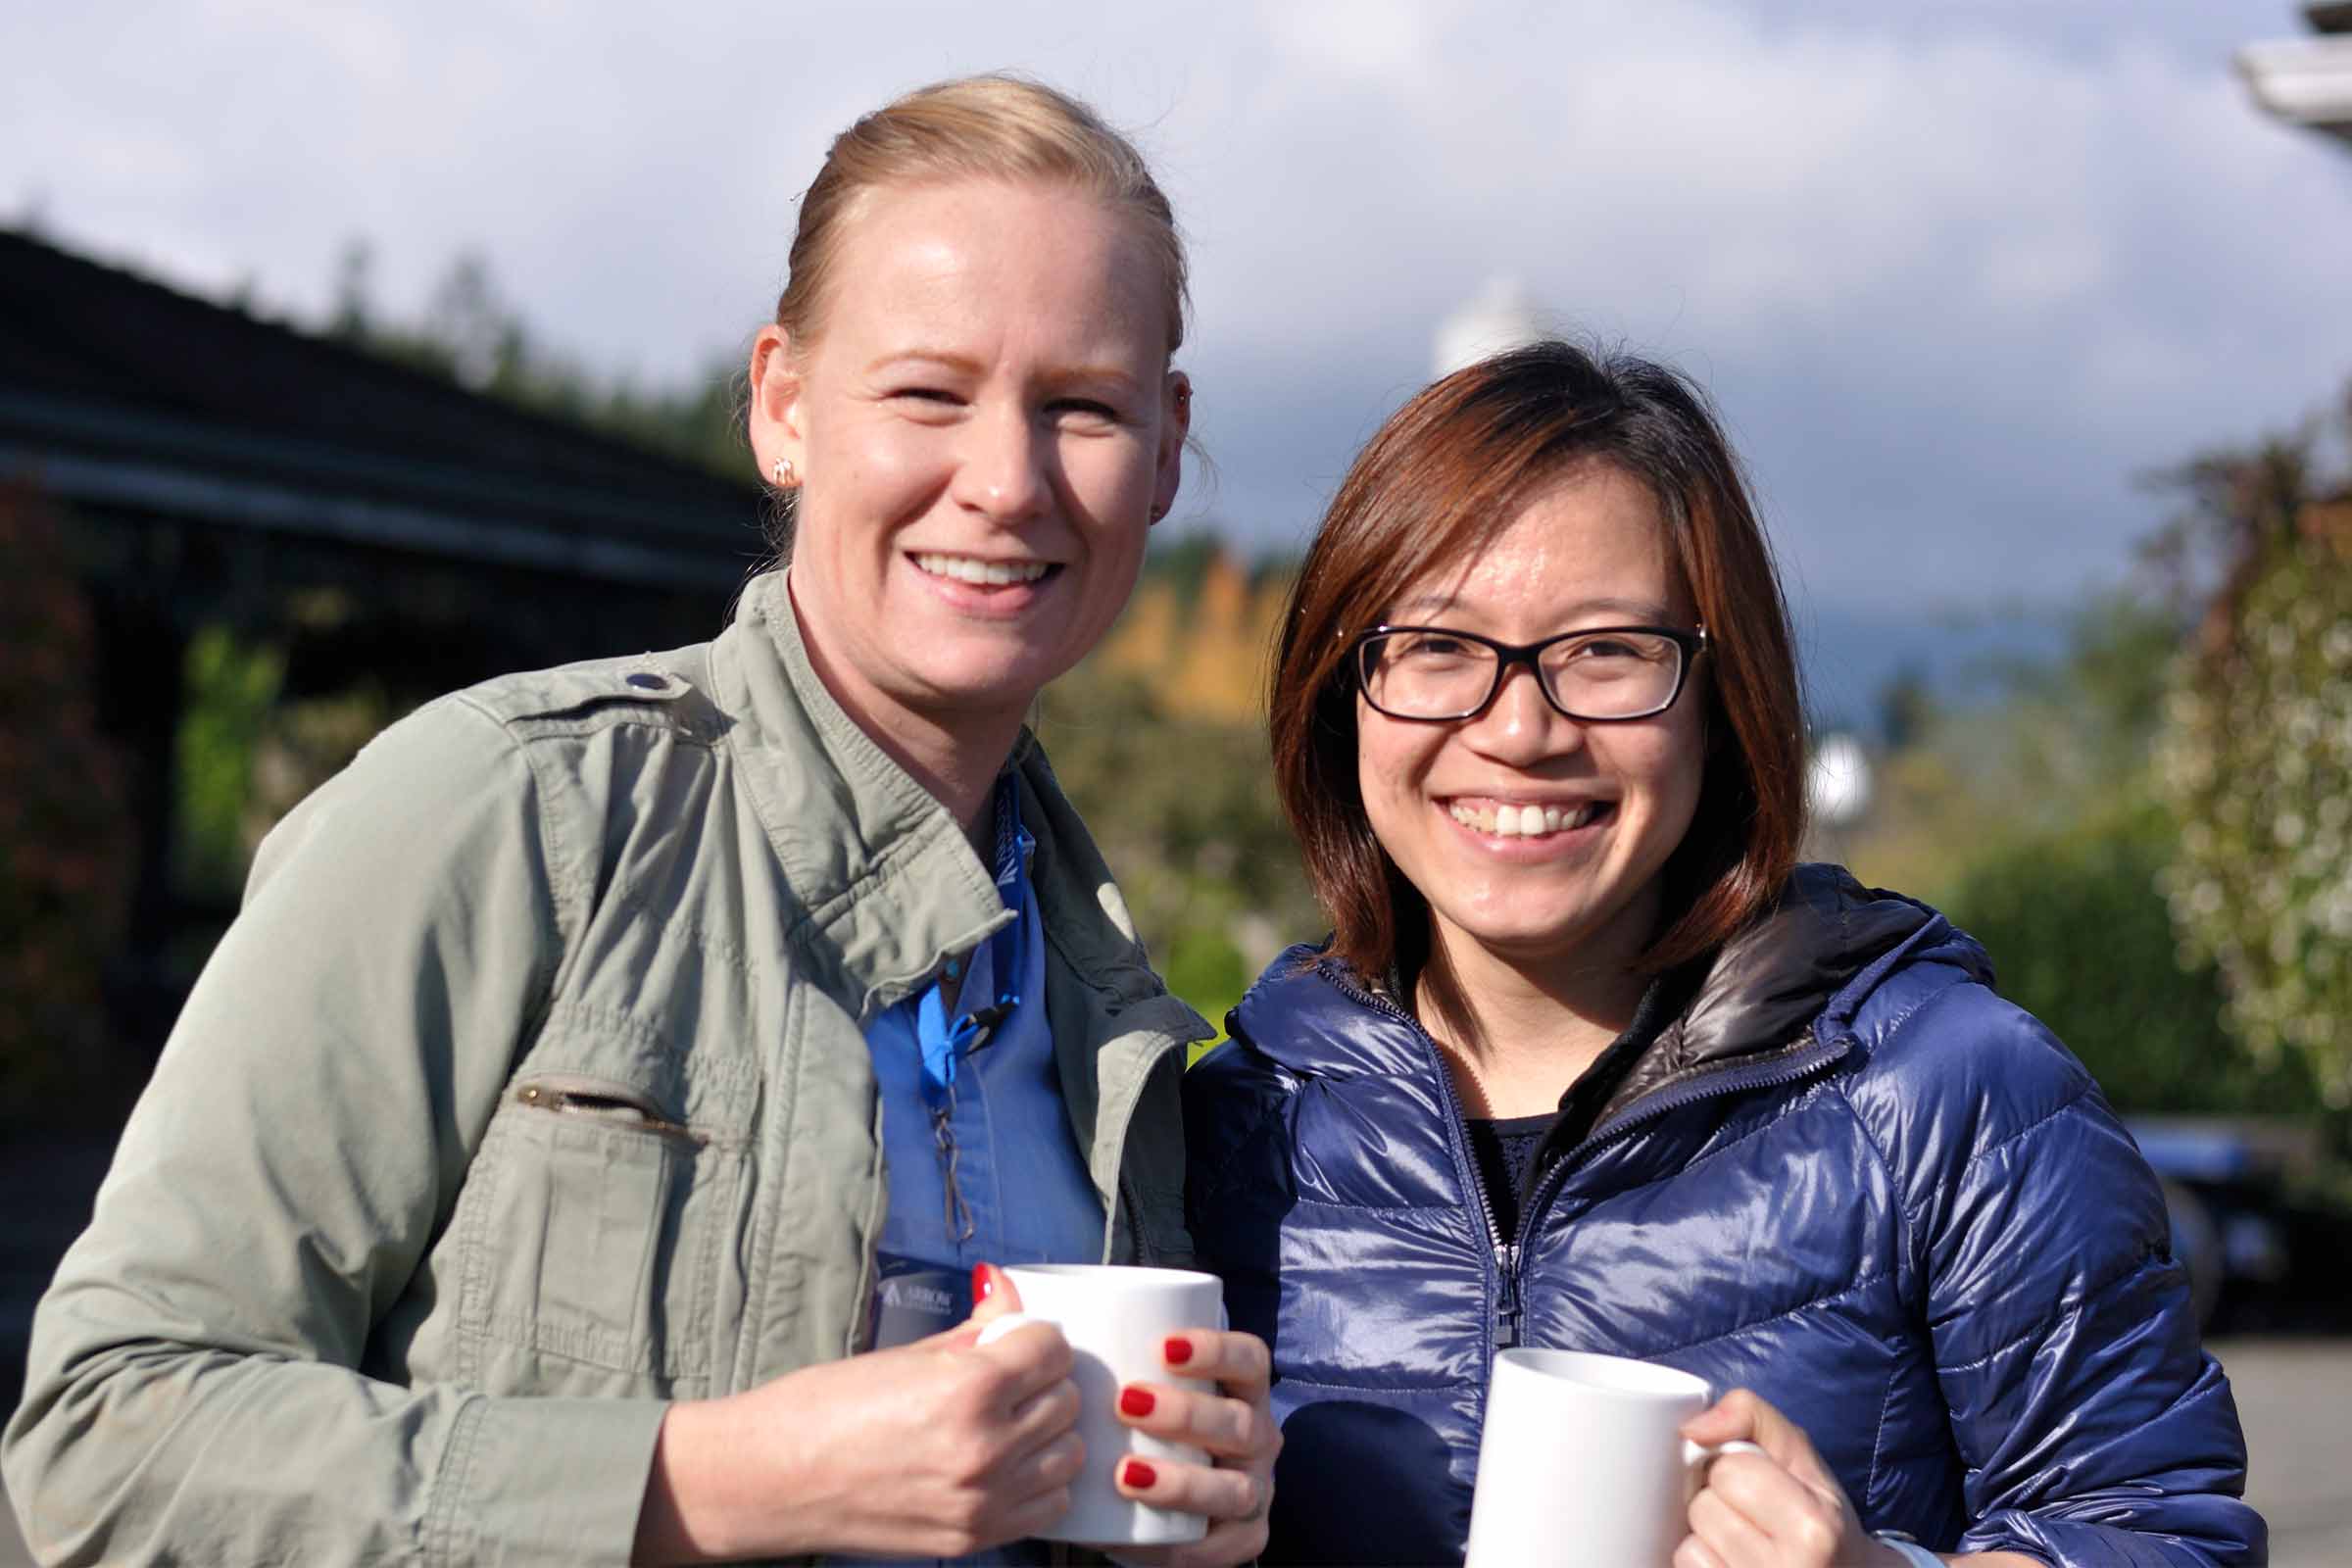 Two Women from Arrow Leadership Emerging stream smile while holding coffee